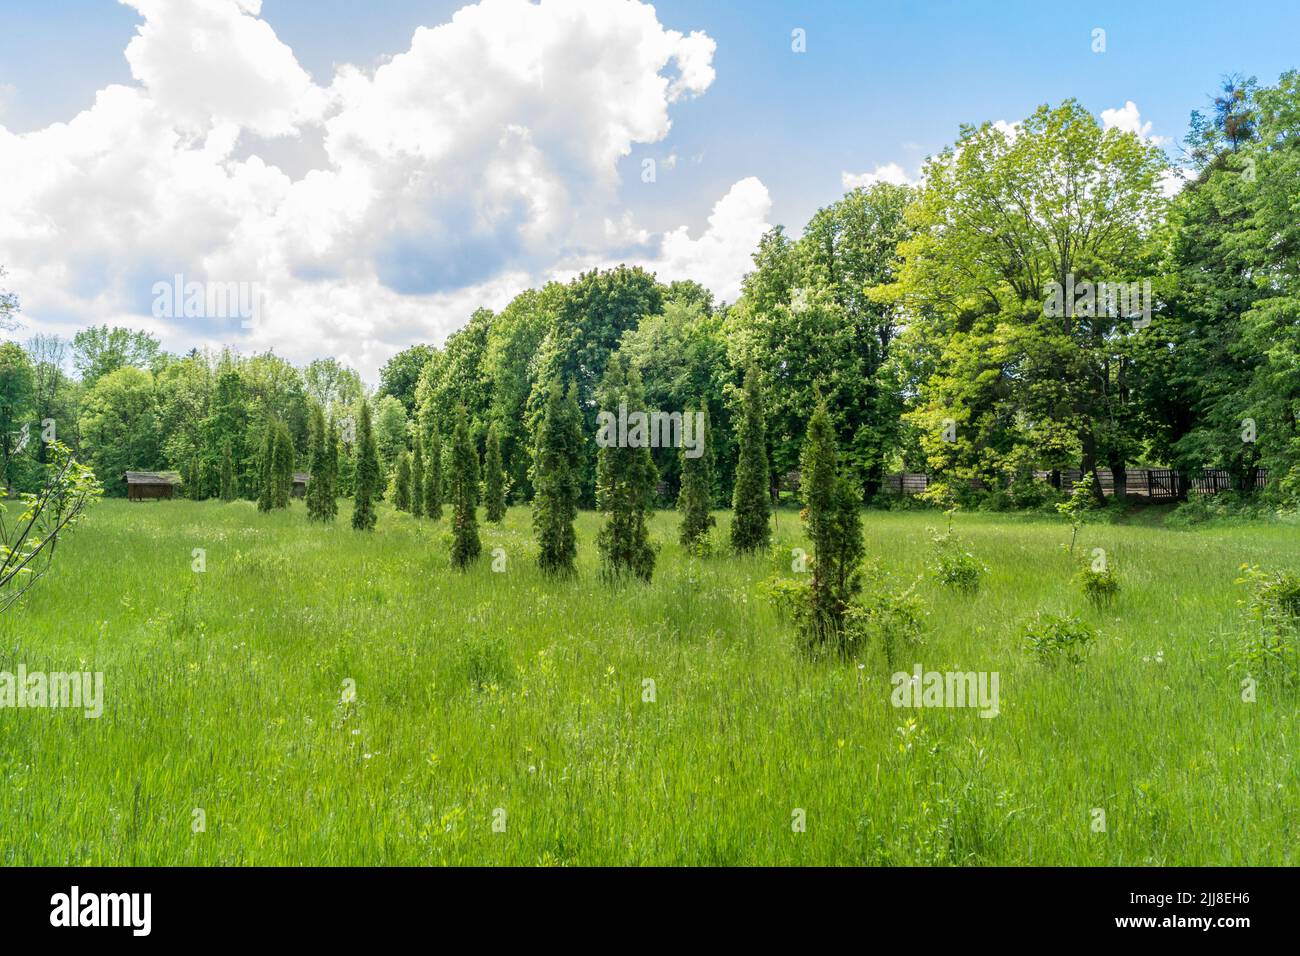 In the park, thuja trees planted in a row grow. Green park in spring Stock Photo